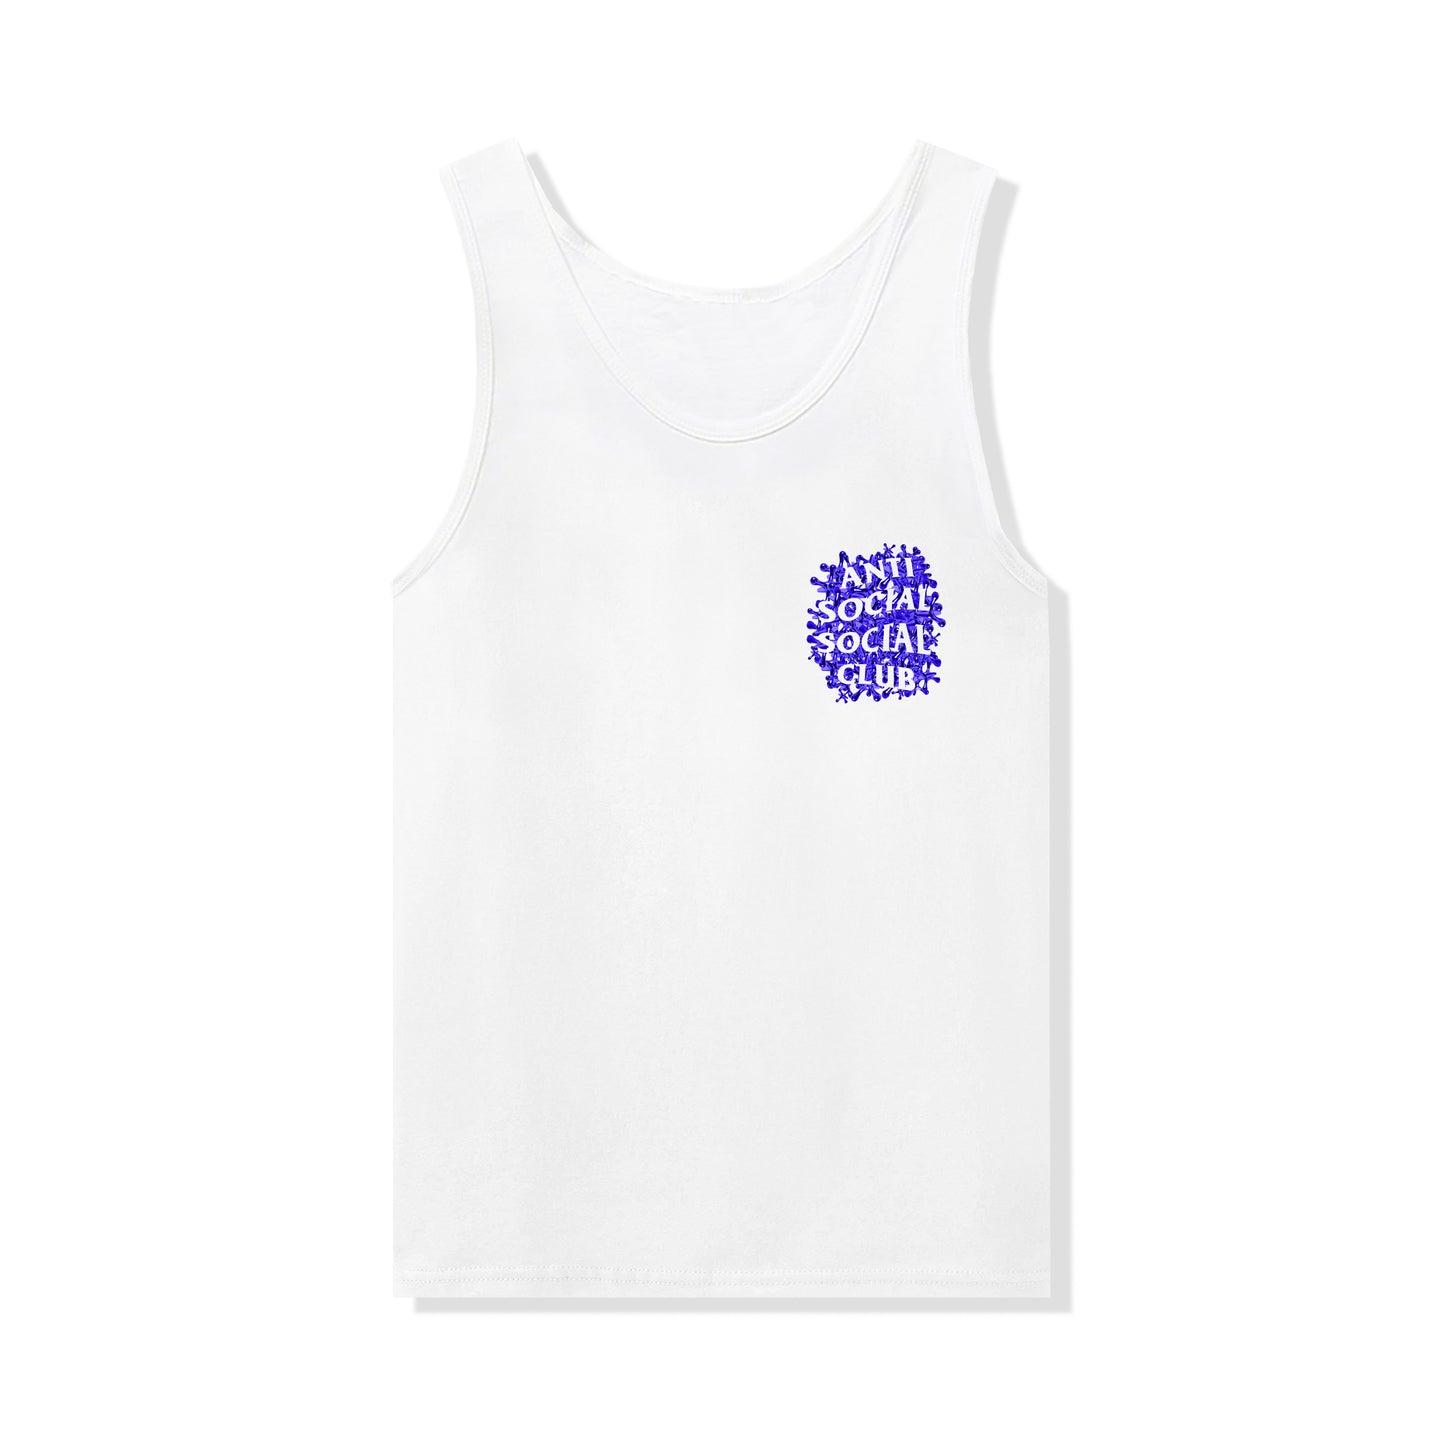 Our Experiment White Tank Top